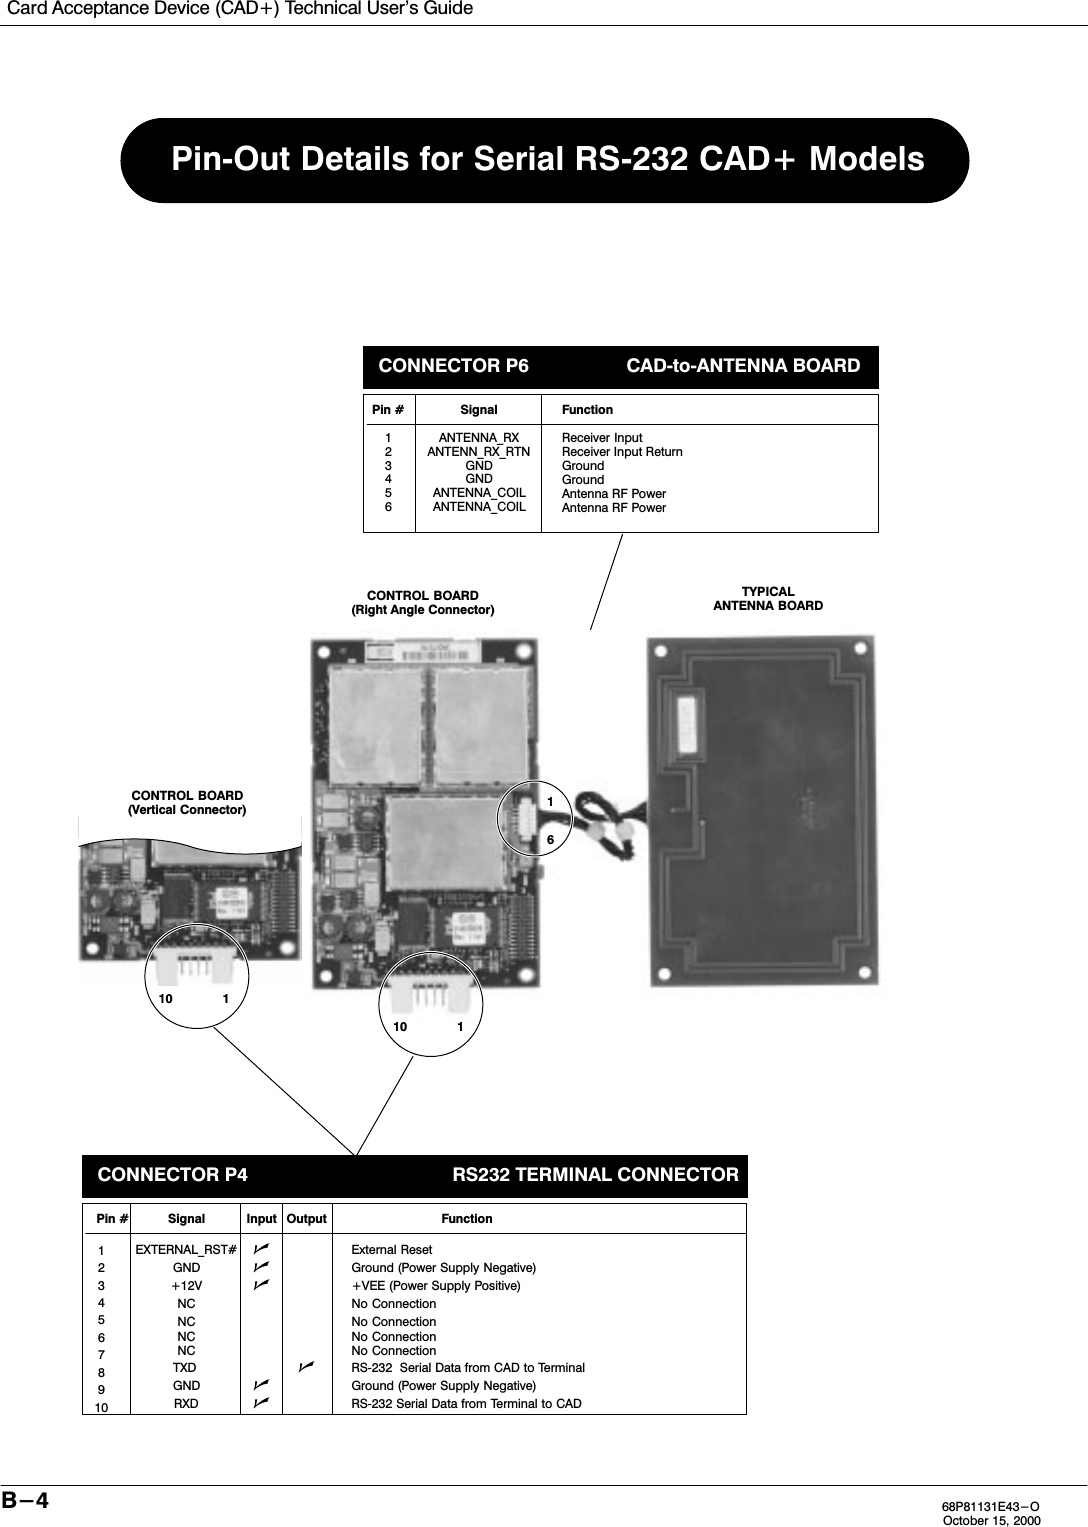 Card Acceptance Device (CAD+) Technical User&apos;s GuideB-4 68P81131E43-OOctober 15, 2000CONNECTOR P4 RS232 TERMINAL CONNECTORPin # Signal Input Output FunctionEXTERNAL_RST# External ResetGND Ground (Power Supply Negative)+12V +VEE (Power Supply Positive)NC No ConnectionNC No ConnectionNC No ConnectionNC No ConnectionTXD  RS232  Serial Data from CAD to TerminalGND Ground (Power Supply Negative)RXD RS232 Serial Data from Terminal to CADPinOut Details for Serial RS232 CAD+ ModelsCONNECTOR P6 CADtoANTENNA BOARDSignalANTENNA_RXANTENN_RX_RTNGNDGNDANTENNA_COILANTENNA_COILFunctionReceiver InputReceiver Input ReturnGroundGroundAntenna RF PowerAntenna RF PowerPin #12345612345678910CONTROL BOARD(Right Angle Connector)11061110CONTROL BOARD(Vertical Connector)TYPICALANTENNA BOARD